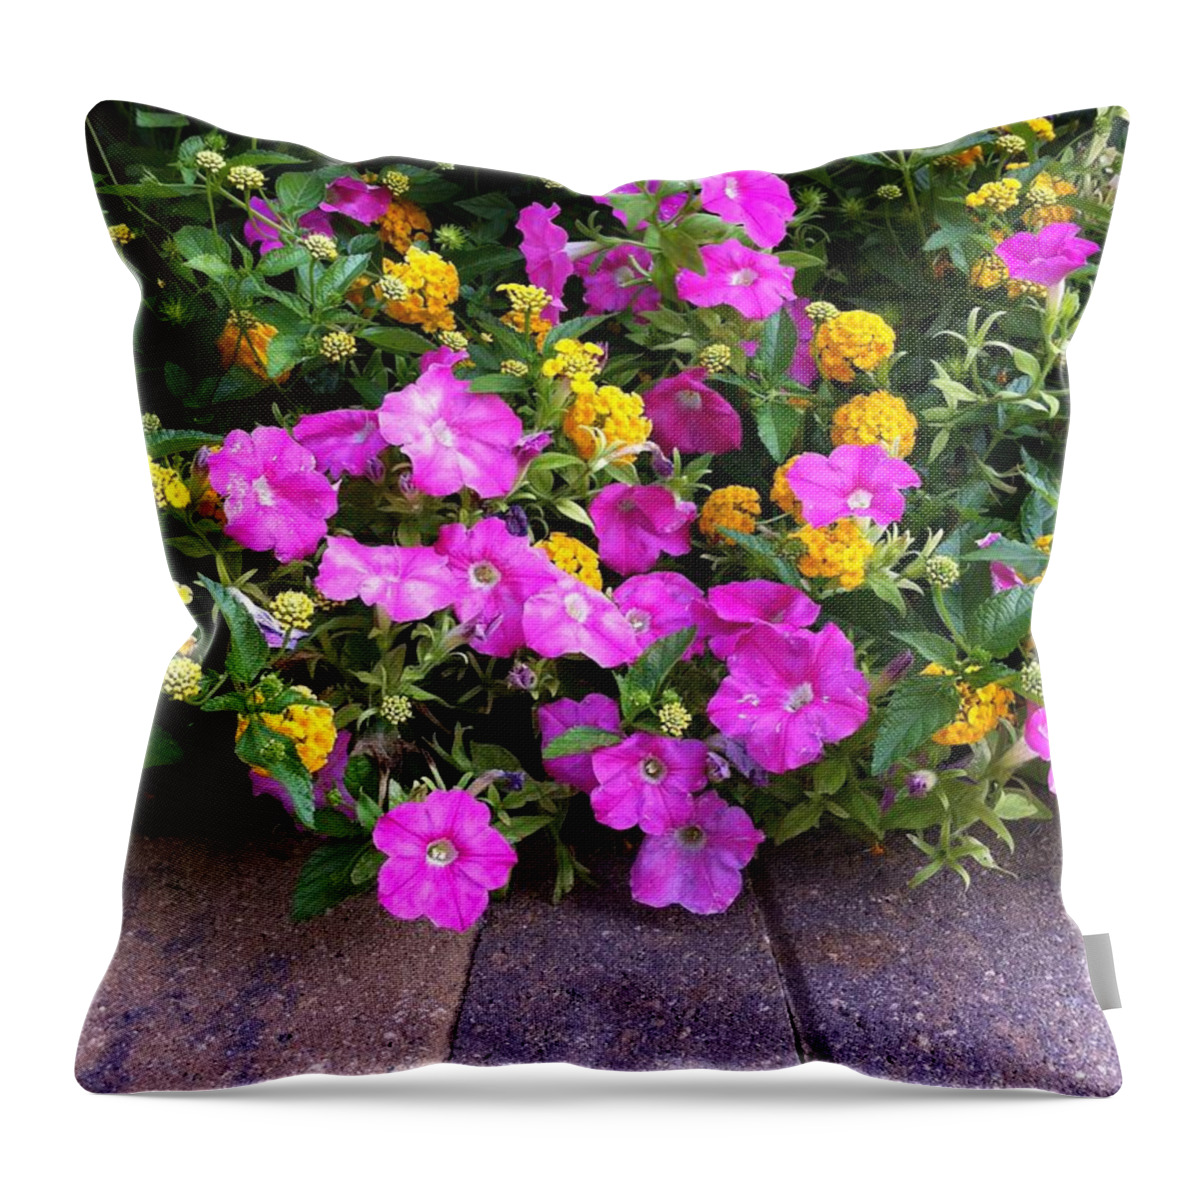 Flowers Throw Pillow featuring the photograph Stop And Smell The Flowers by Matthew Seufer